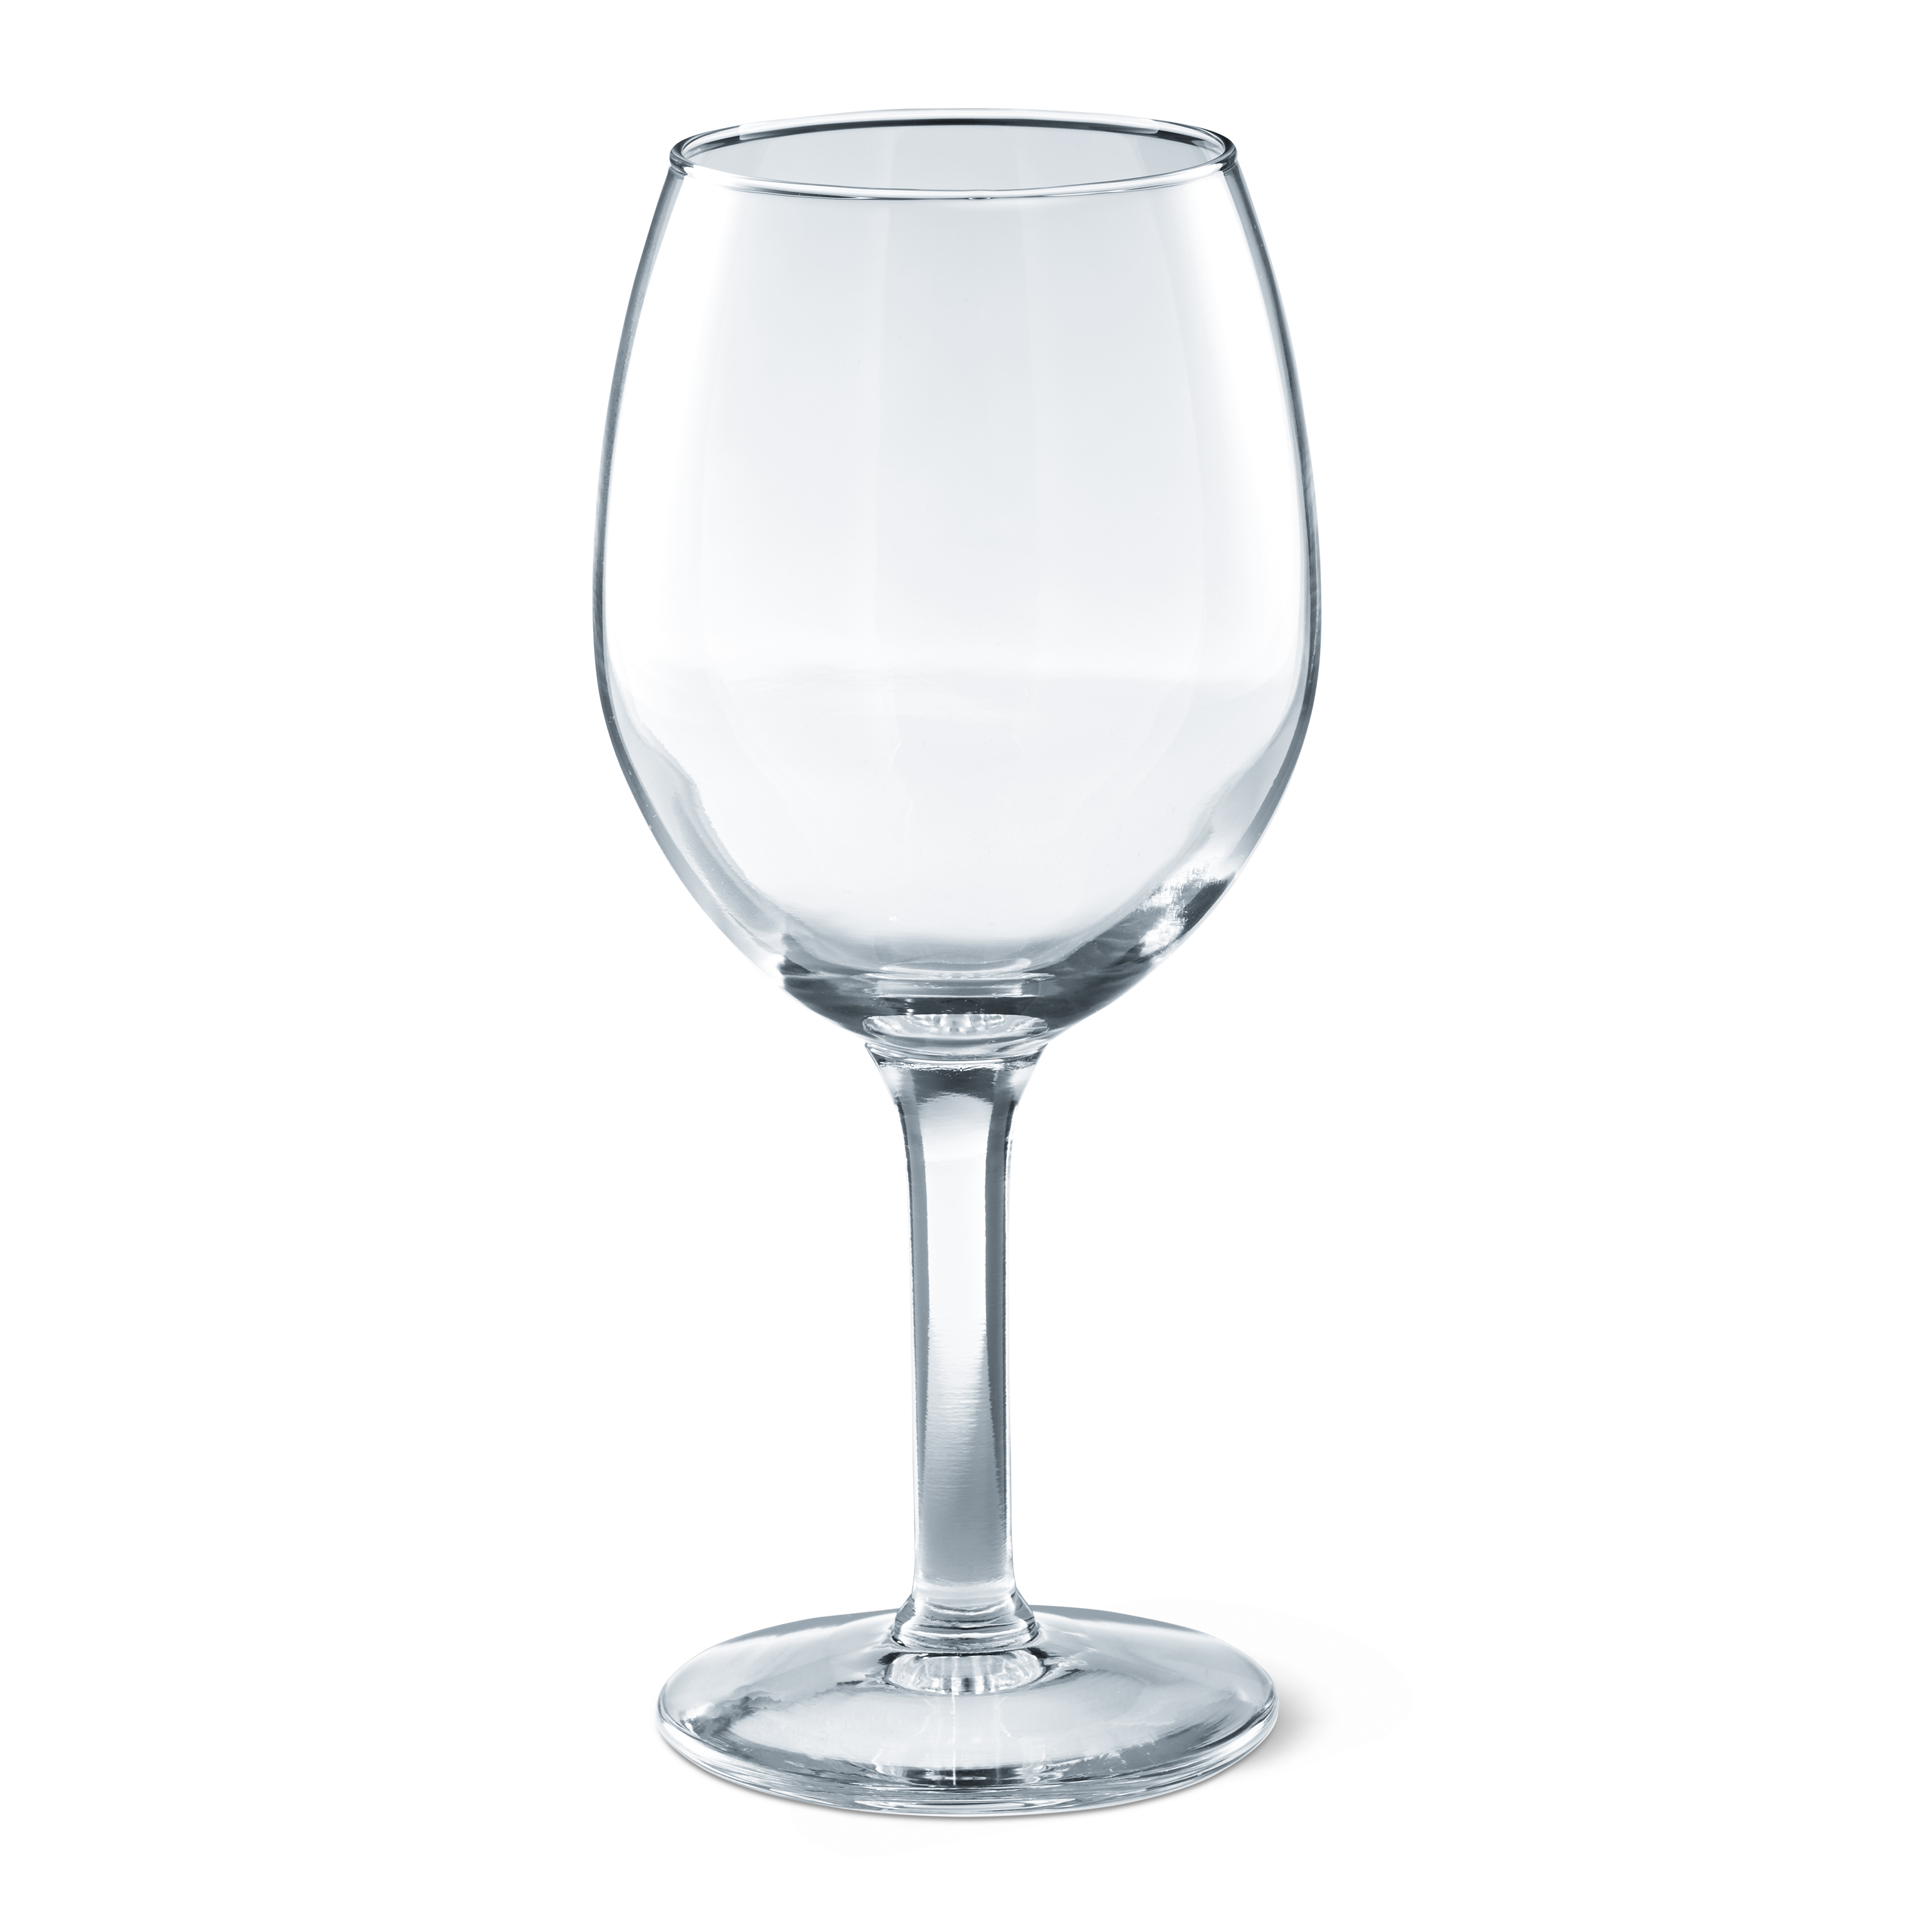 Mainstays All-Purpose 11-Ounce Wine Glasses, Set of 12 - image 1 of 1